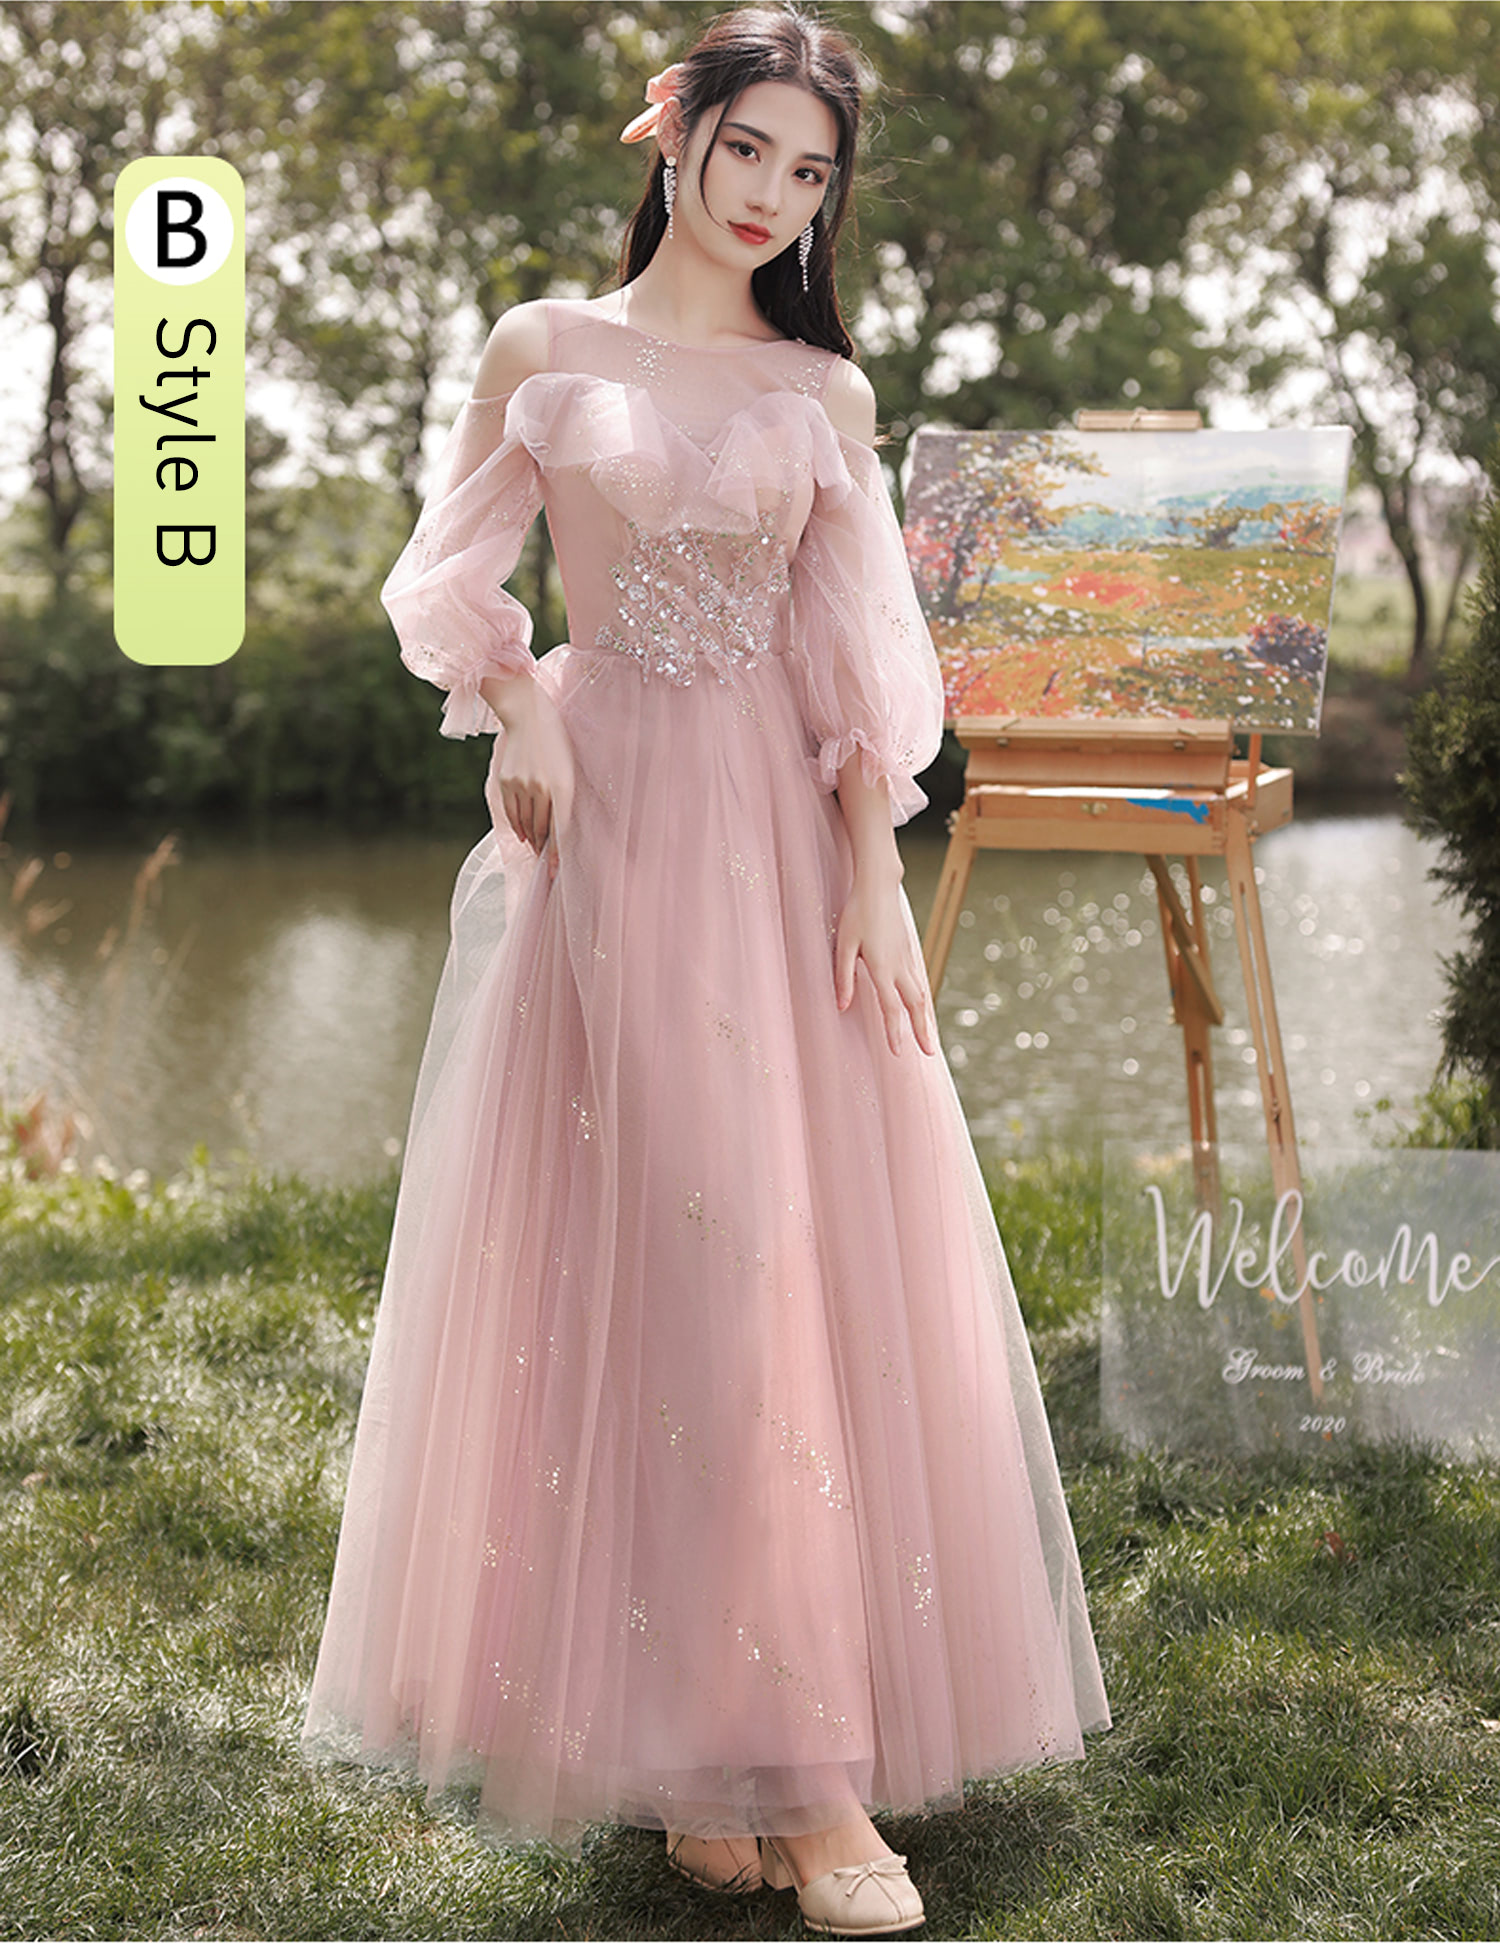 Romantic-Pink-Bridal-Party-Dress-Elegant-Occasions-Formal-Gown18.jpg